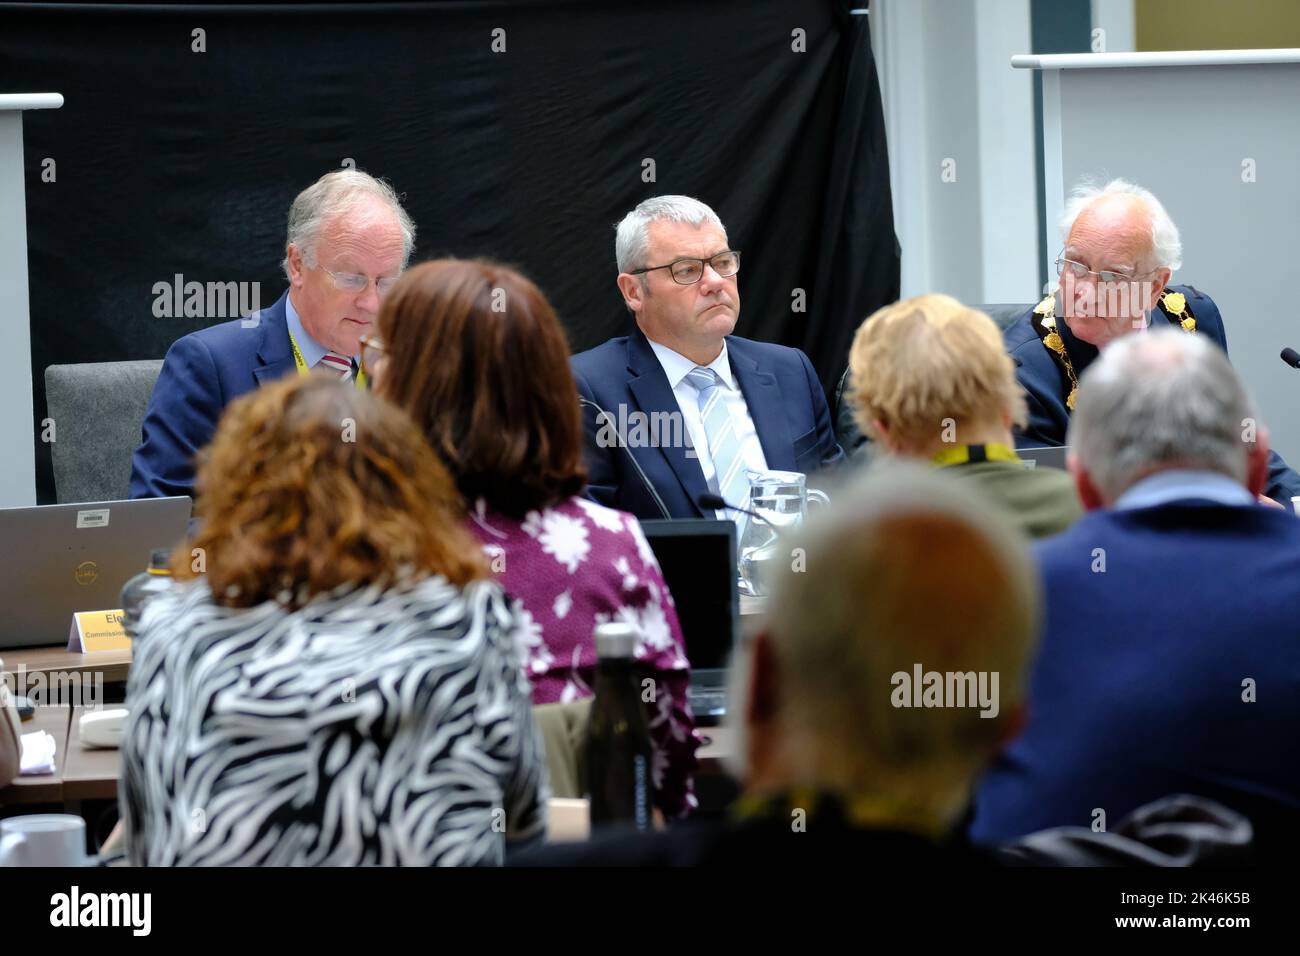 Hereford, Herefordshire, UK – Friday 30th September 2022 – Herefordshire Council called an Extraordinary Meeting today to discuss the recent Ofsted inspection report which found the councils Children’s Services department to be Inadequate in four judgements. Photo shows Herefordshire Council Chief Executive Paul Walker ( centre ) listening to the extraordinary meeting. Photo Steven May / Alamy Live News Stock Photo